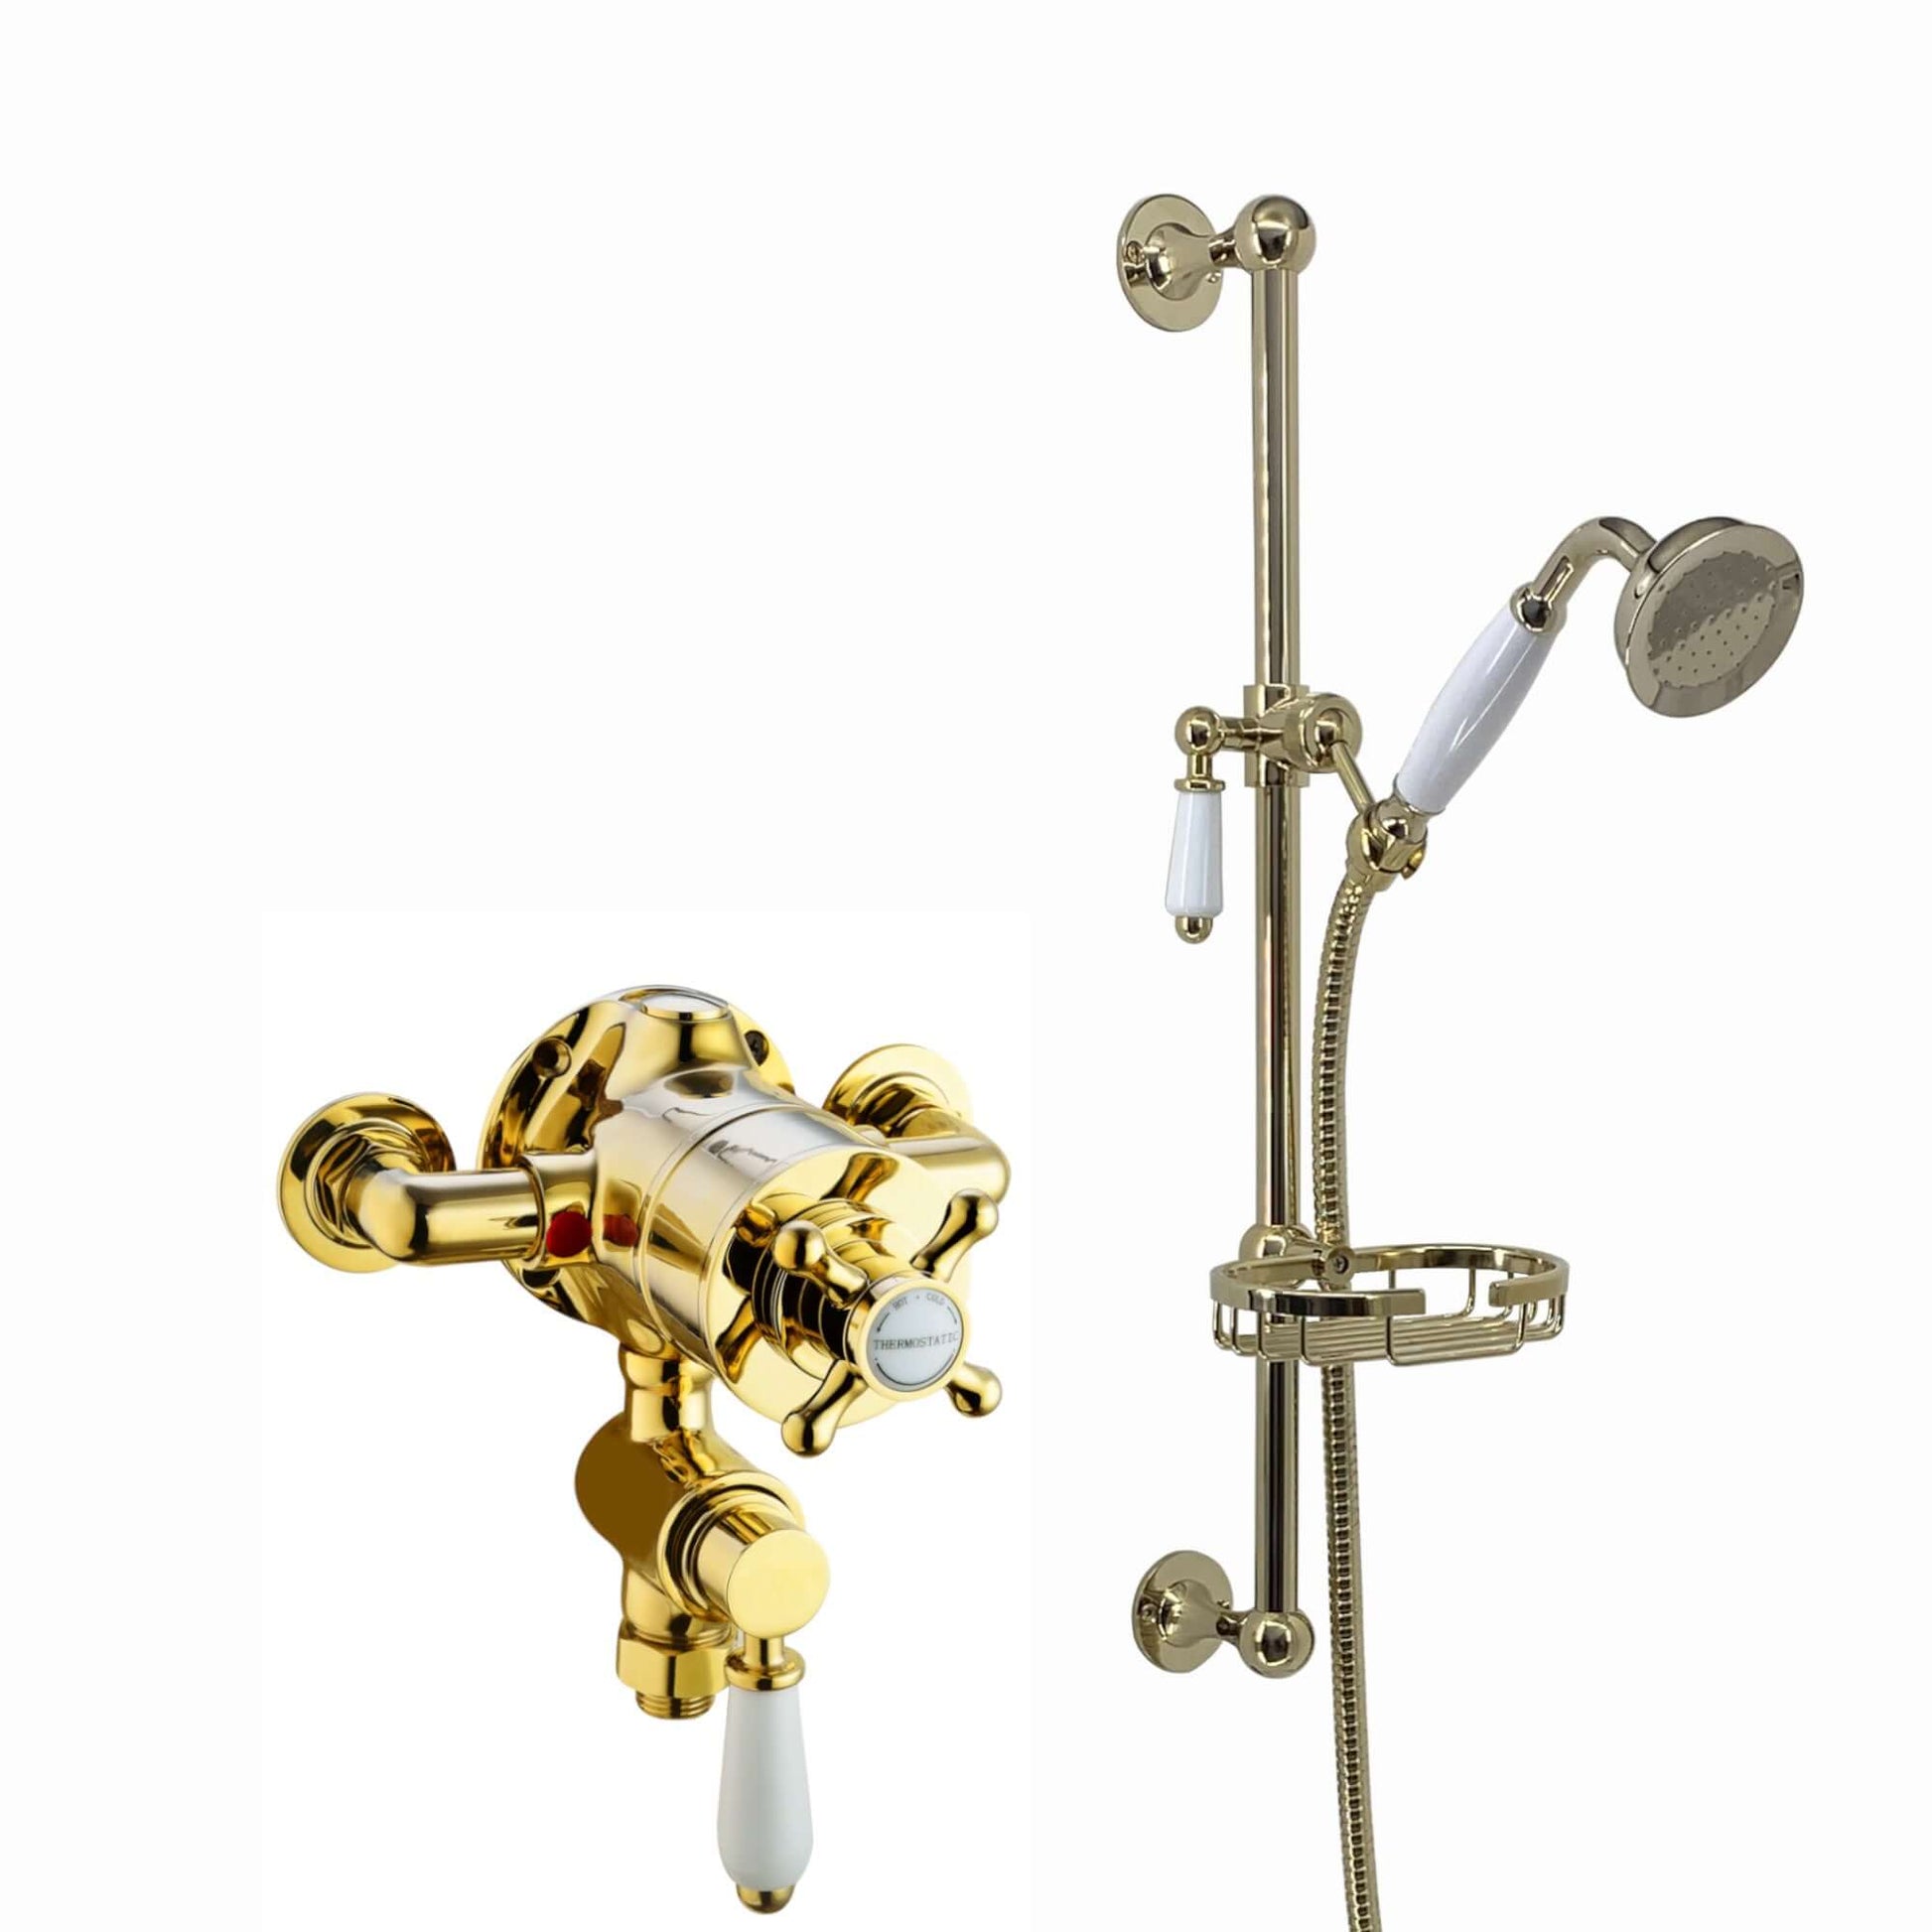 Downton Exposed Traditional Thermostatic Shower Set Incl. Twin Shower Valve And Slider Rail Kit, Soap Holder - English Gold And White - Showers